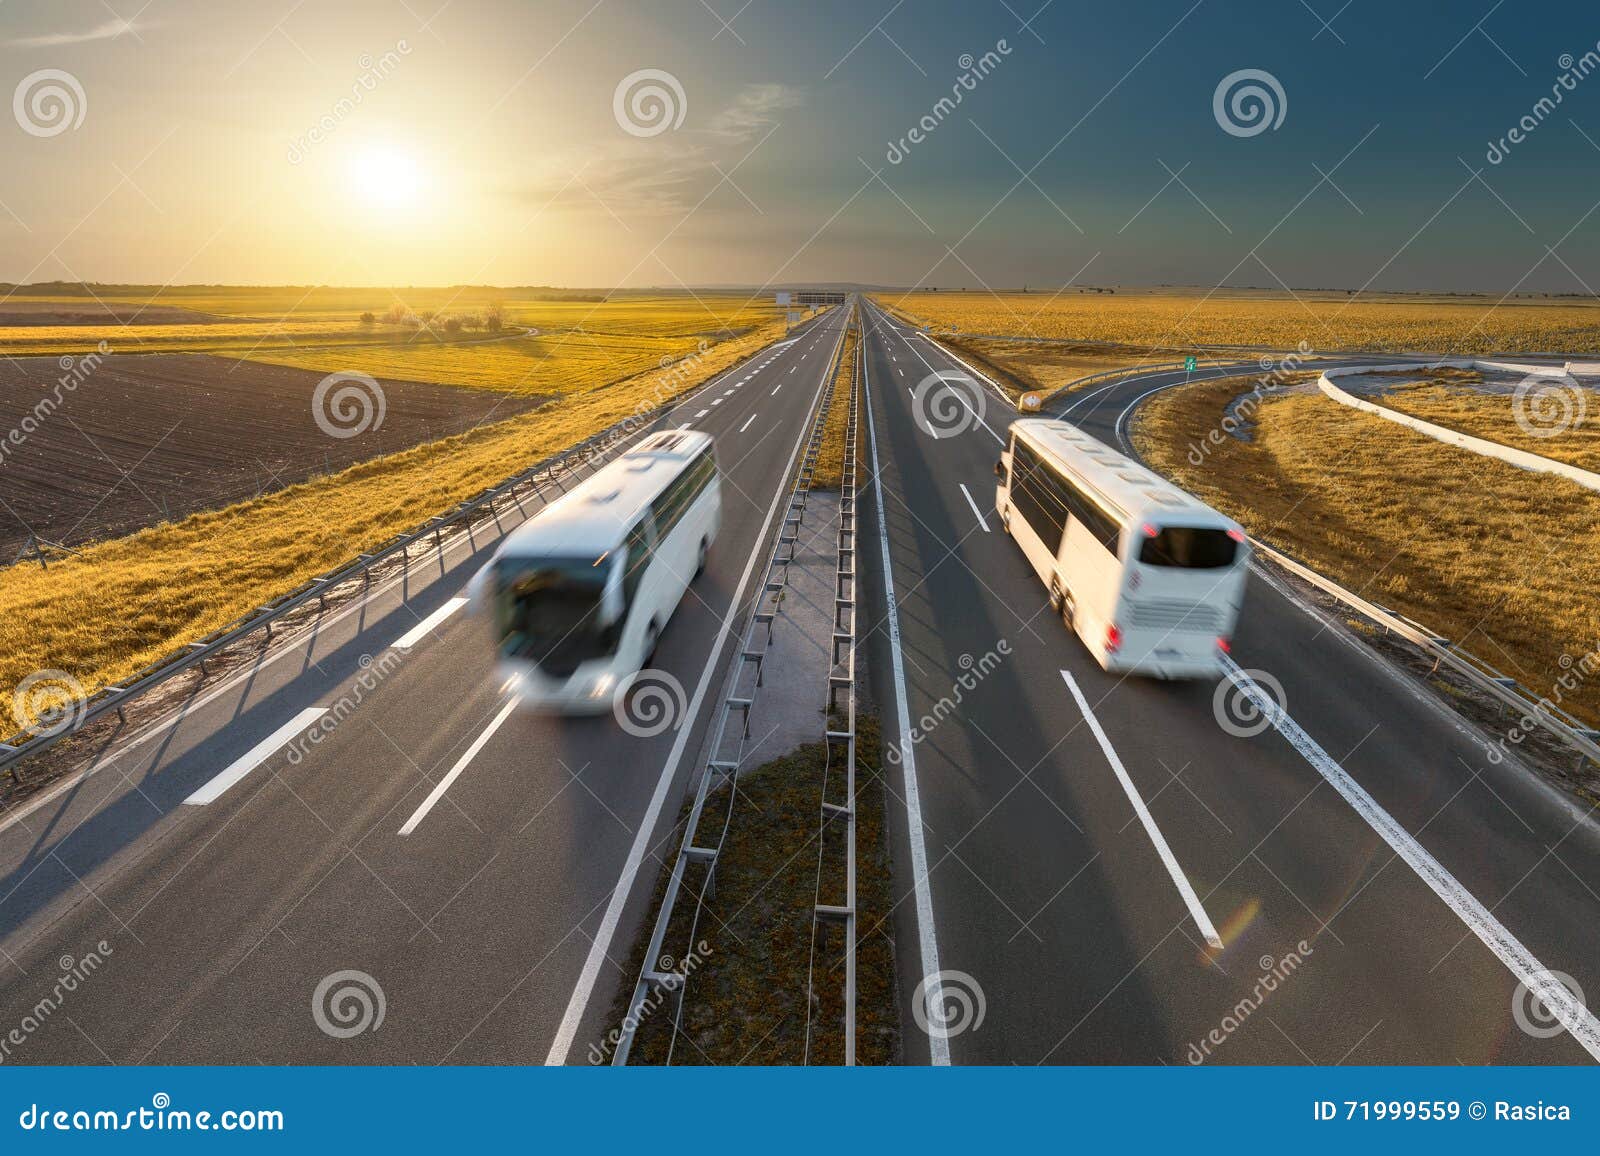 fast travel buses on the highway at idyllic sunset